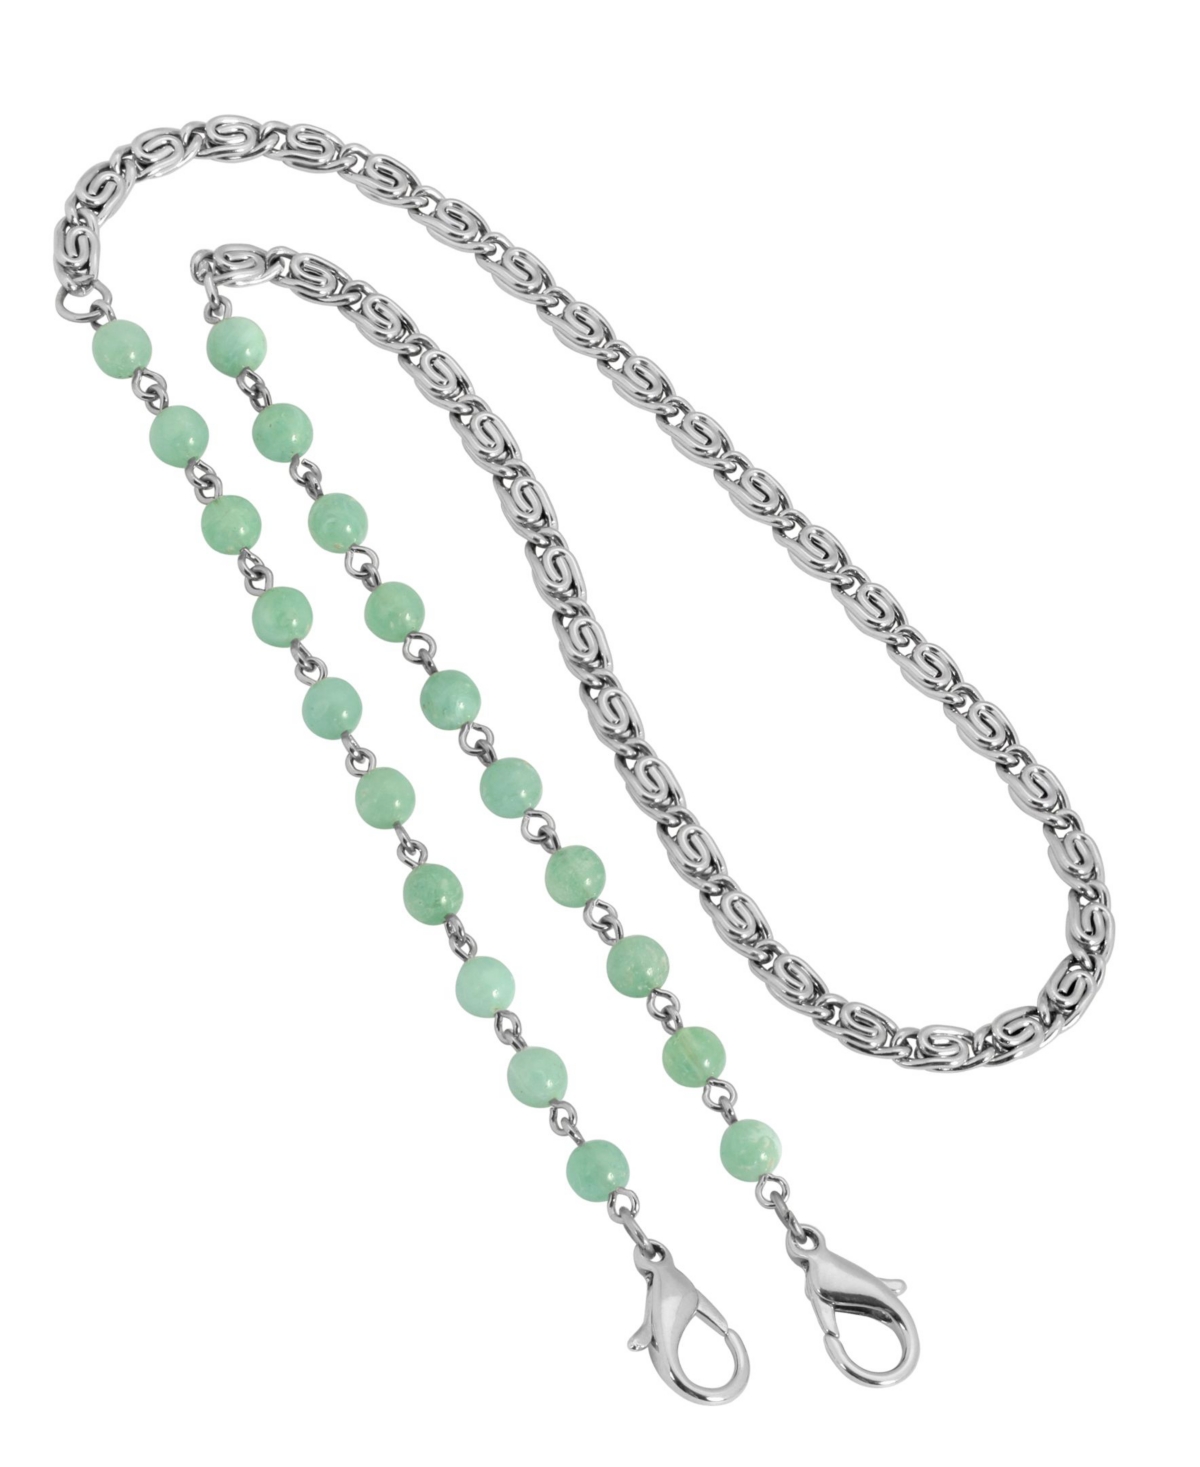 Chain and Bead Mask Holder - Green